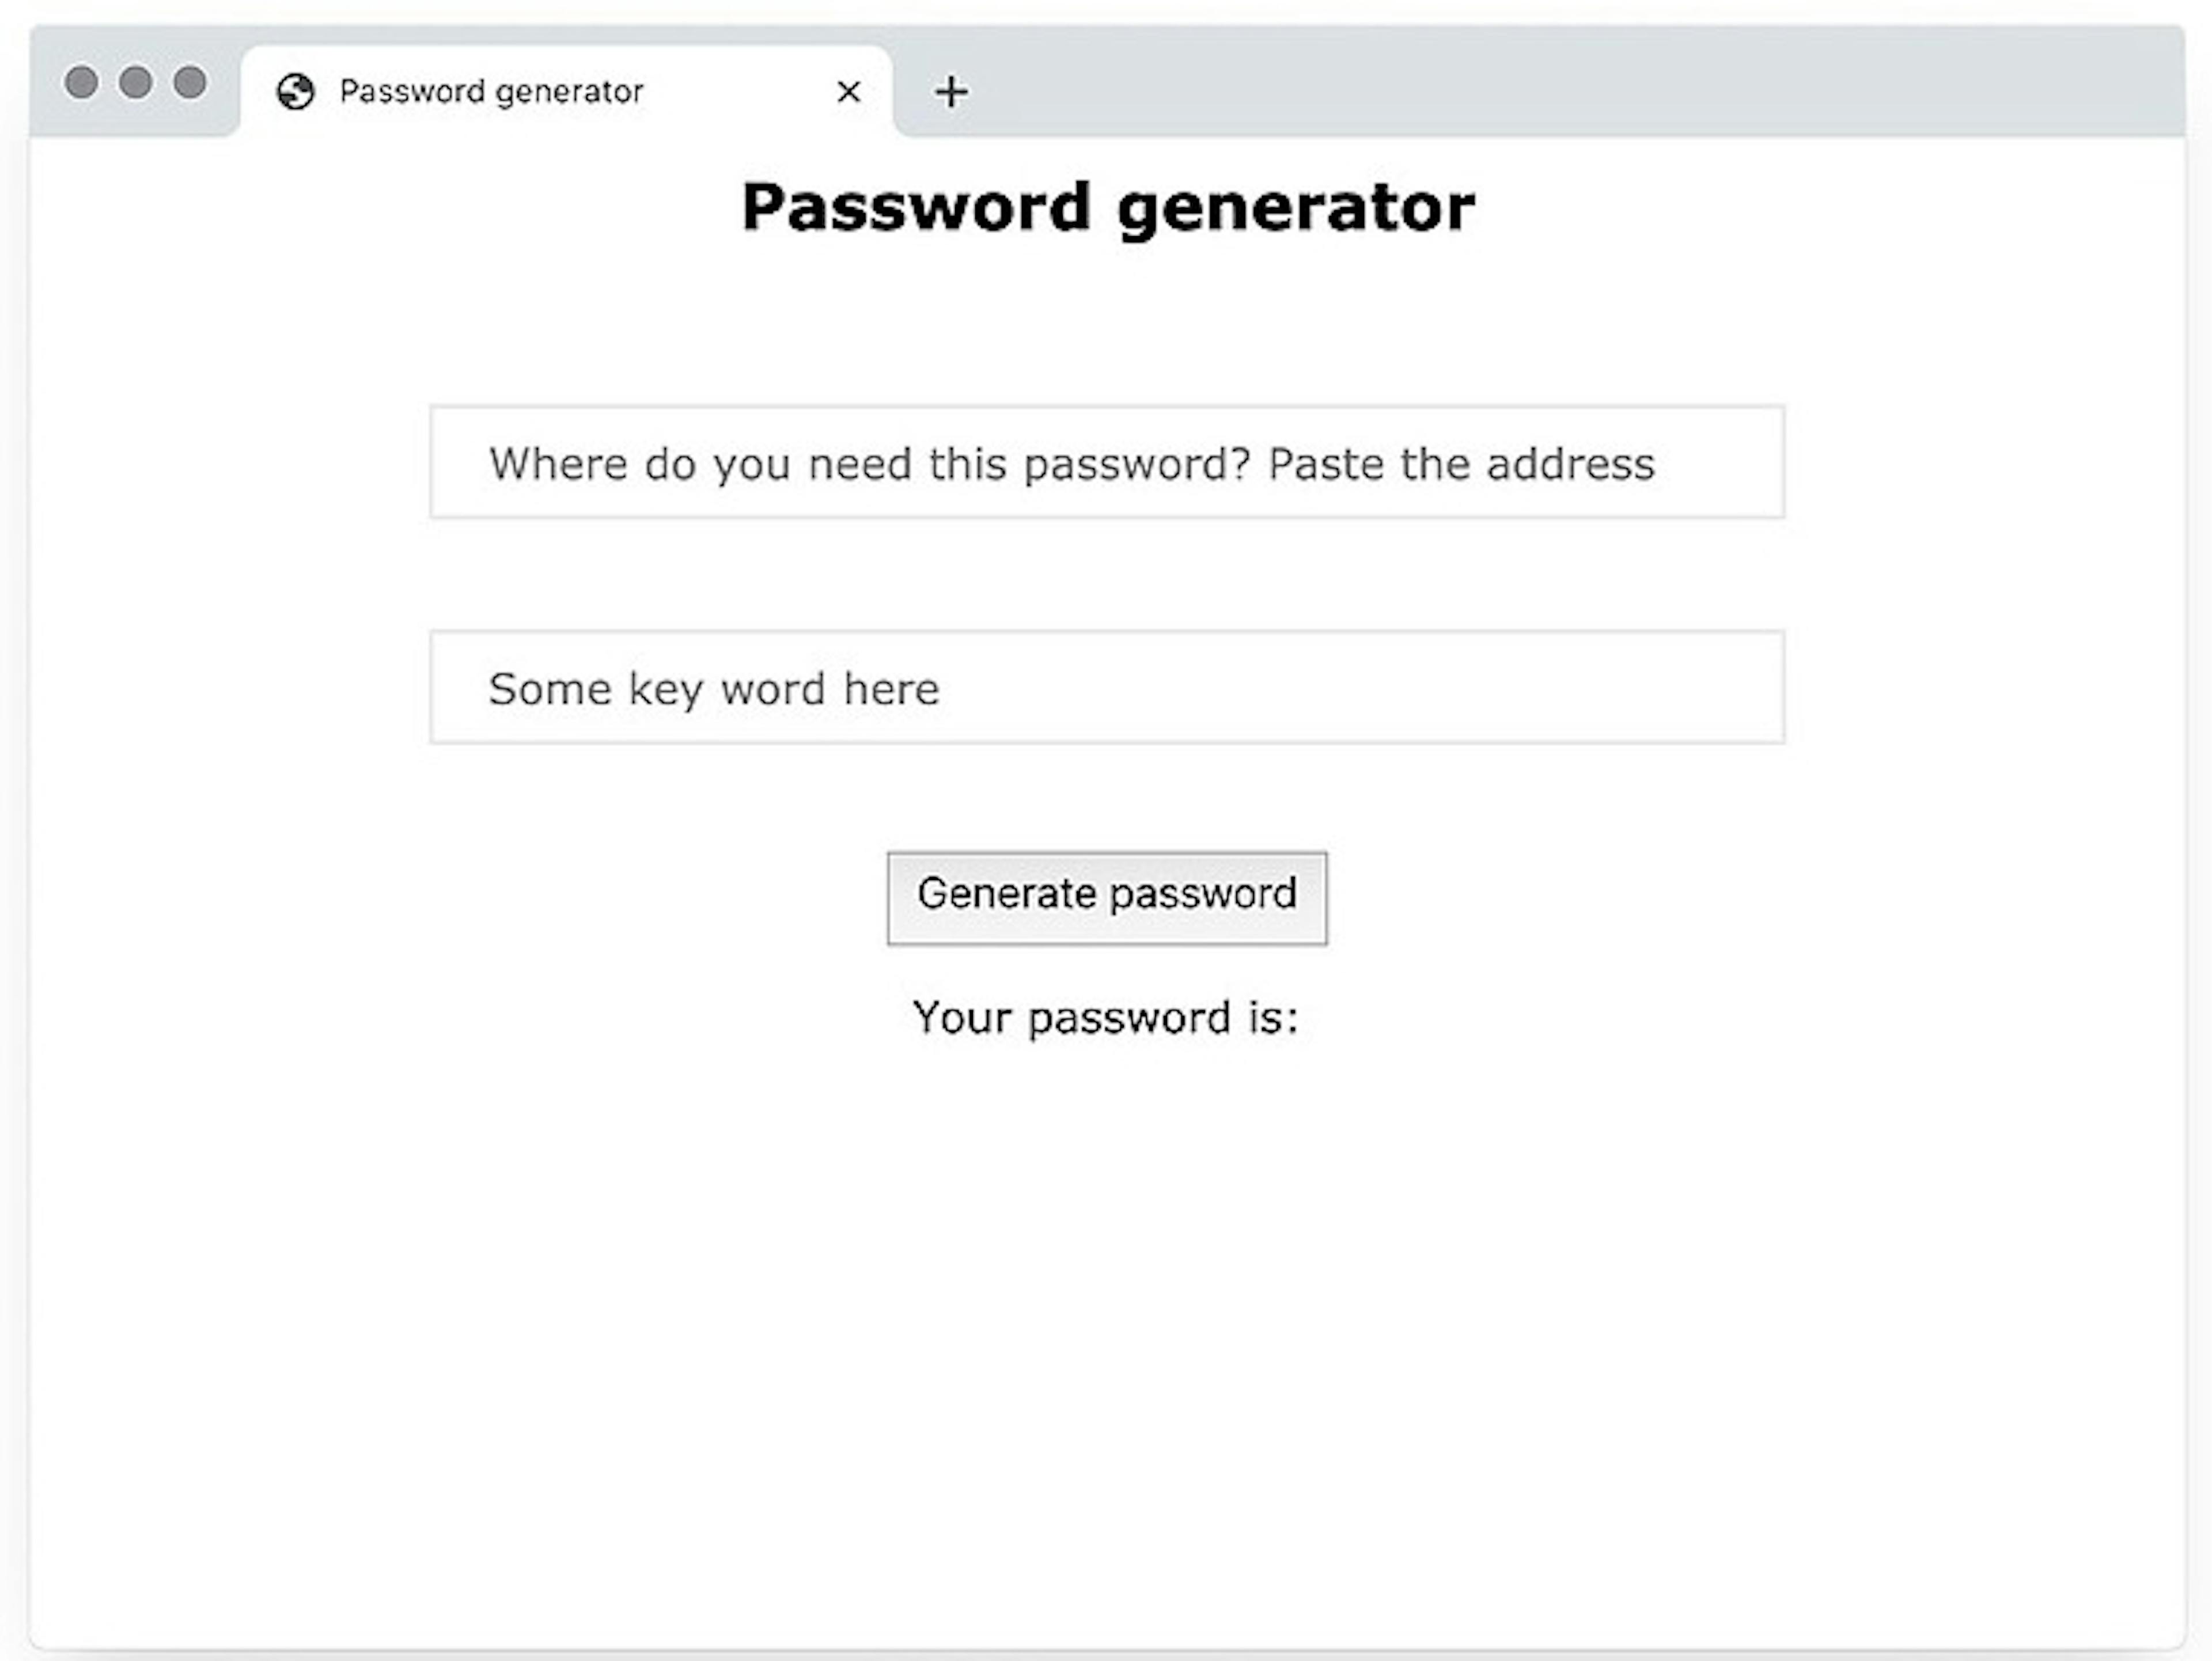 /making-your-own-password-generator-a-step-by-step-guide-8rs42eb feature image